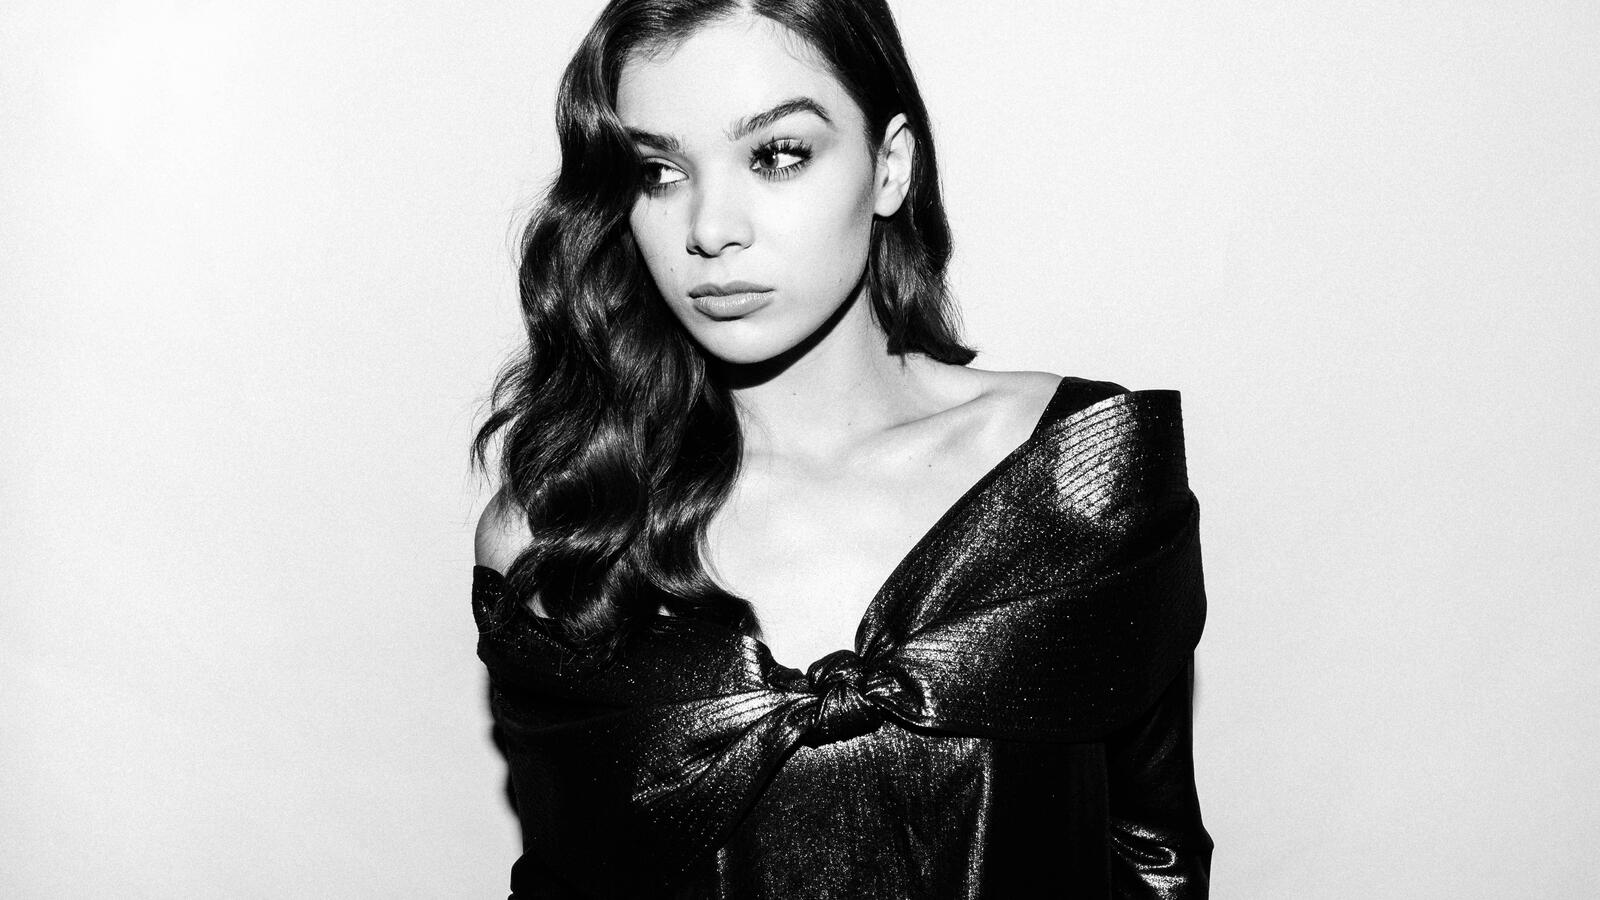 Free photo A shot of Hailee Steinfeld in black and white